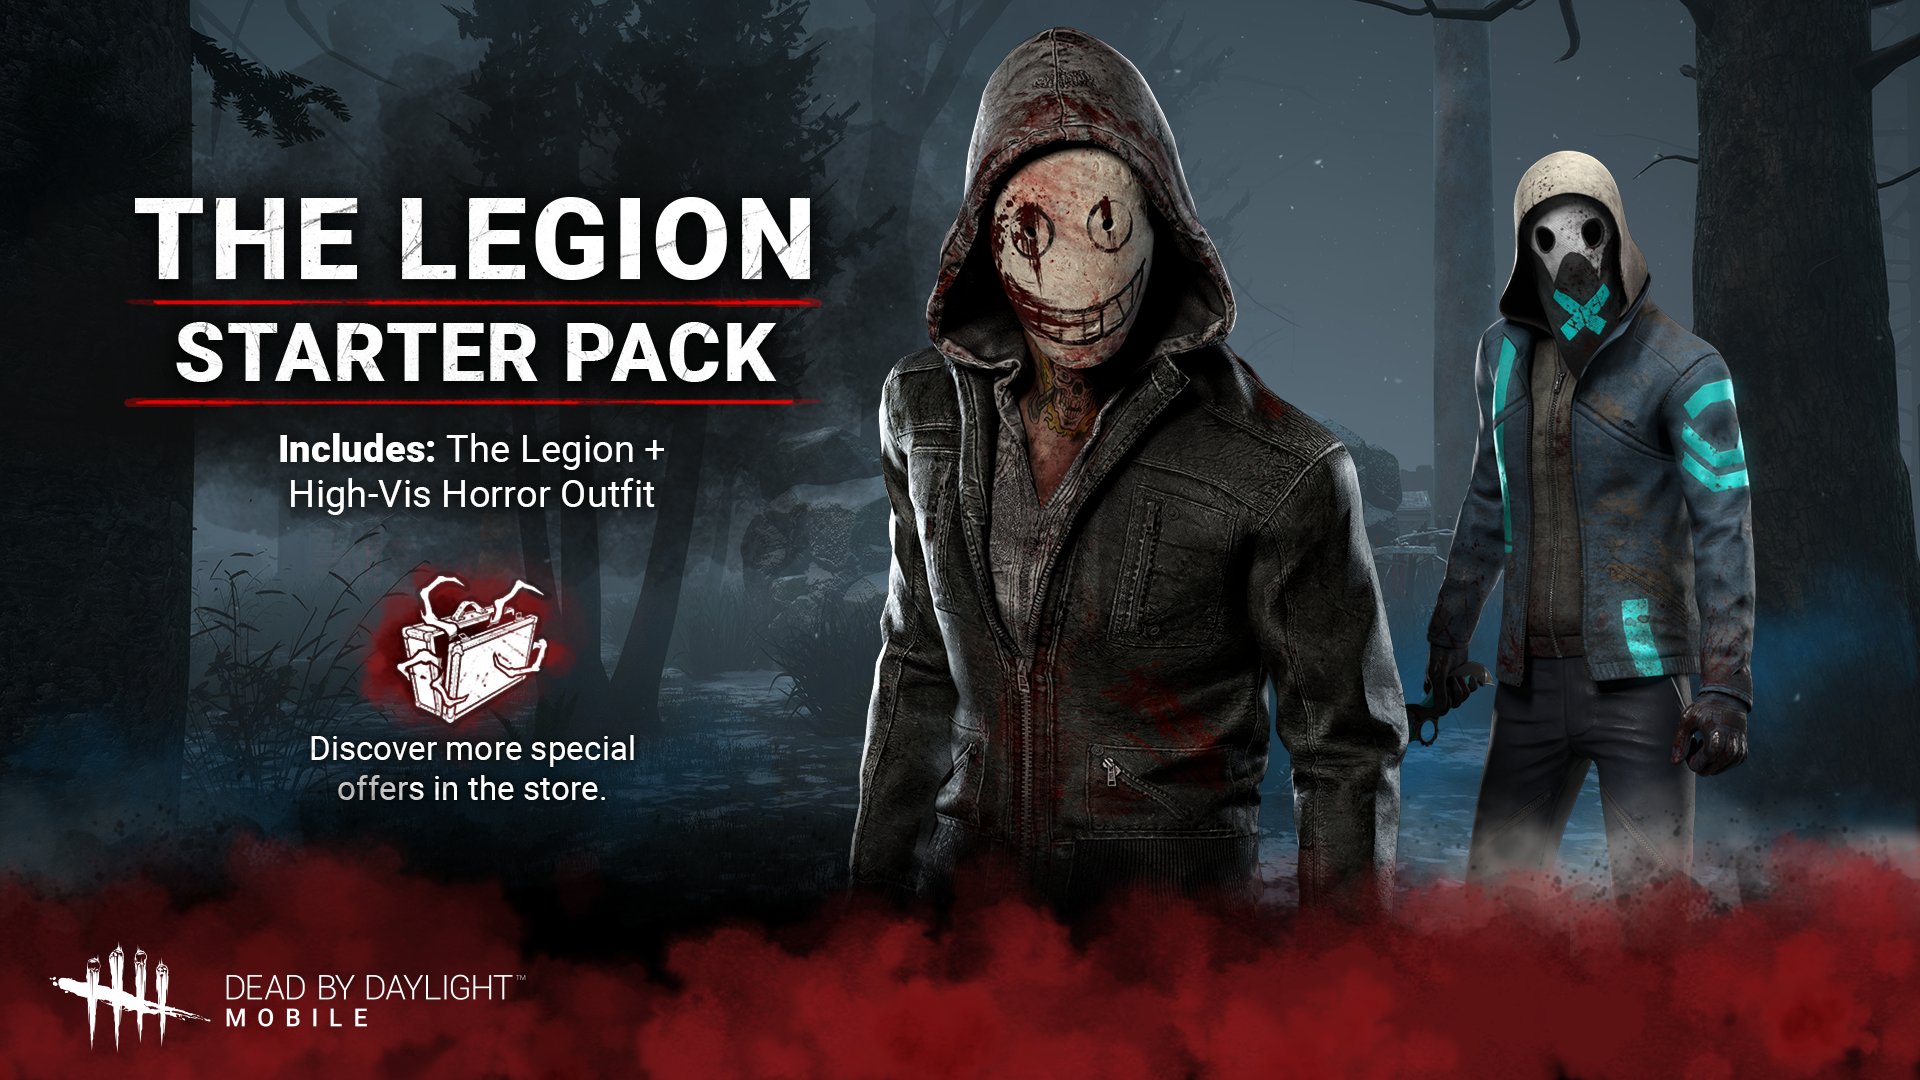 Dead by Daylight Mobile - There's no turning back now. The Starter Killer  Bundle is now available for 30% off in the Store.